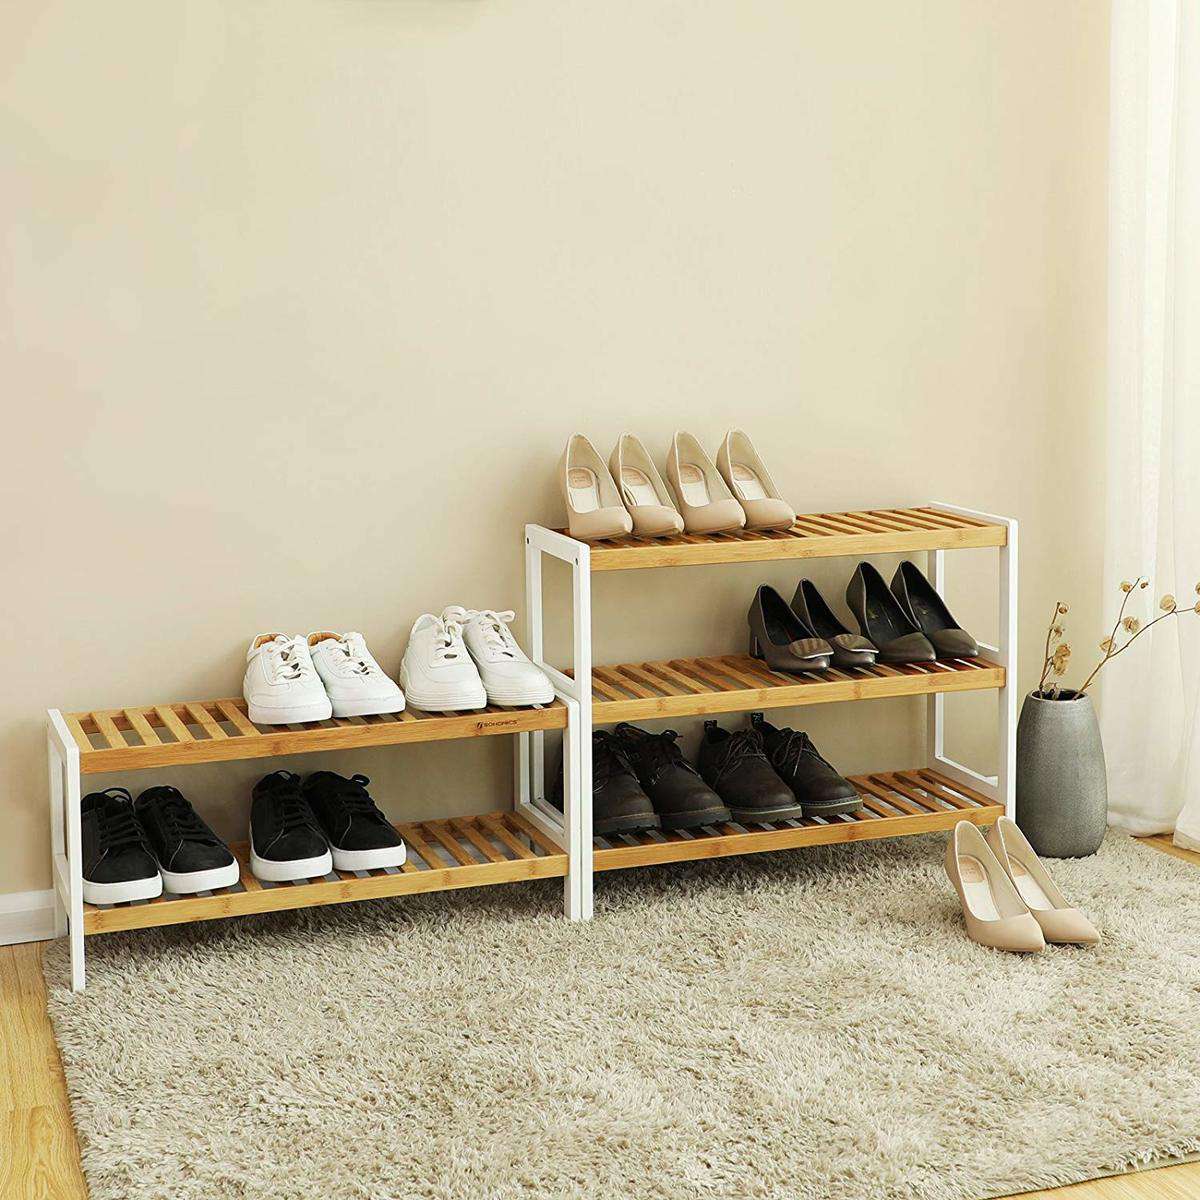 Nancy's Shoe Rack - For 8 Pairs of Shoes - Bamboo Shoe Cabinet - Multifunctional Bathroom Rack